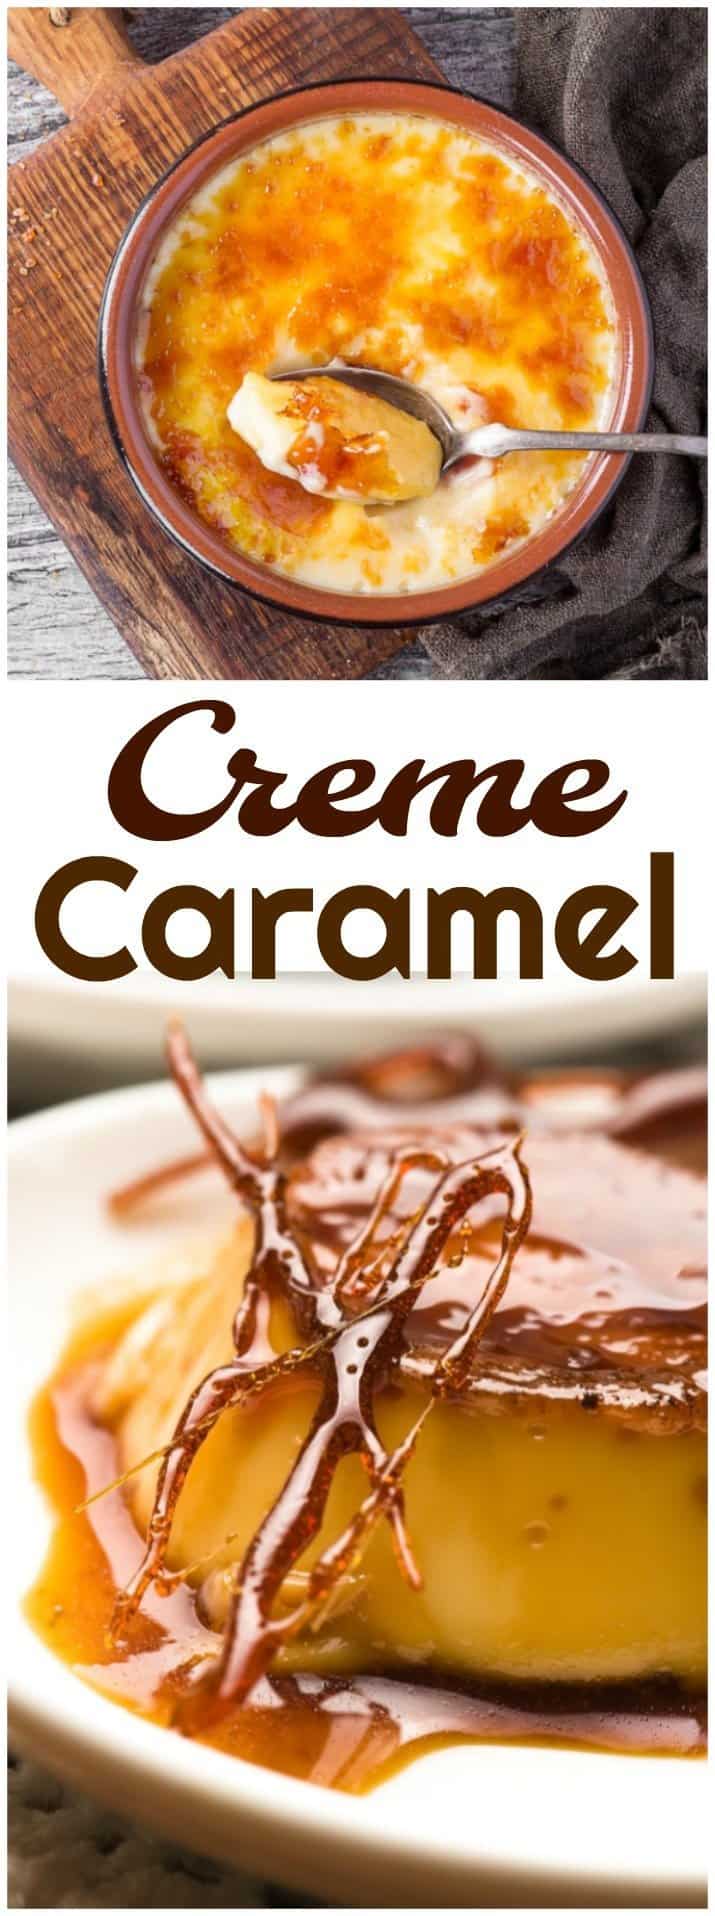 Our guest blogger, Claire, shows us a step-by-step way to make delicious and easy Creme Caramel. Doesn't it look scrumptious? Click the photo for the complete recipe. 